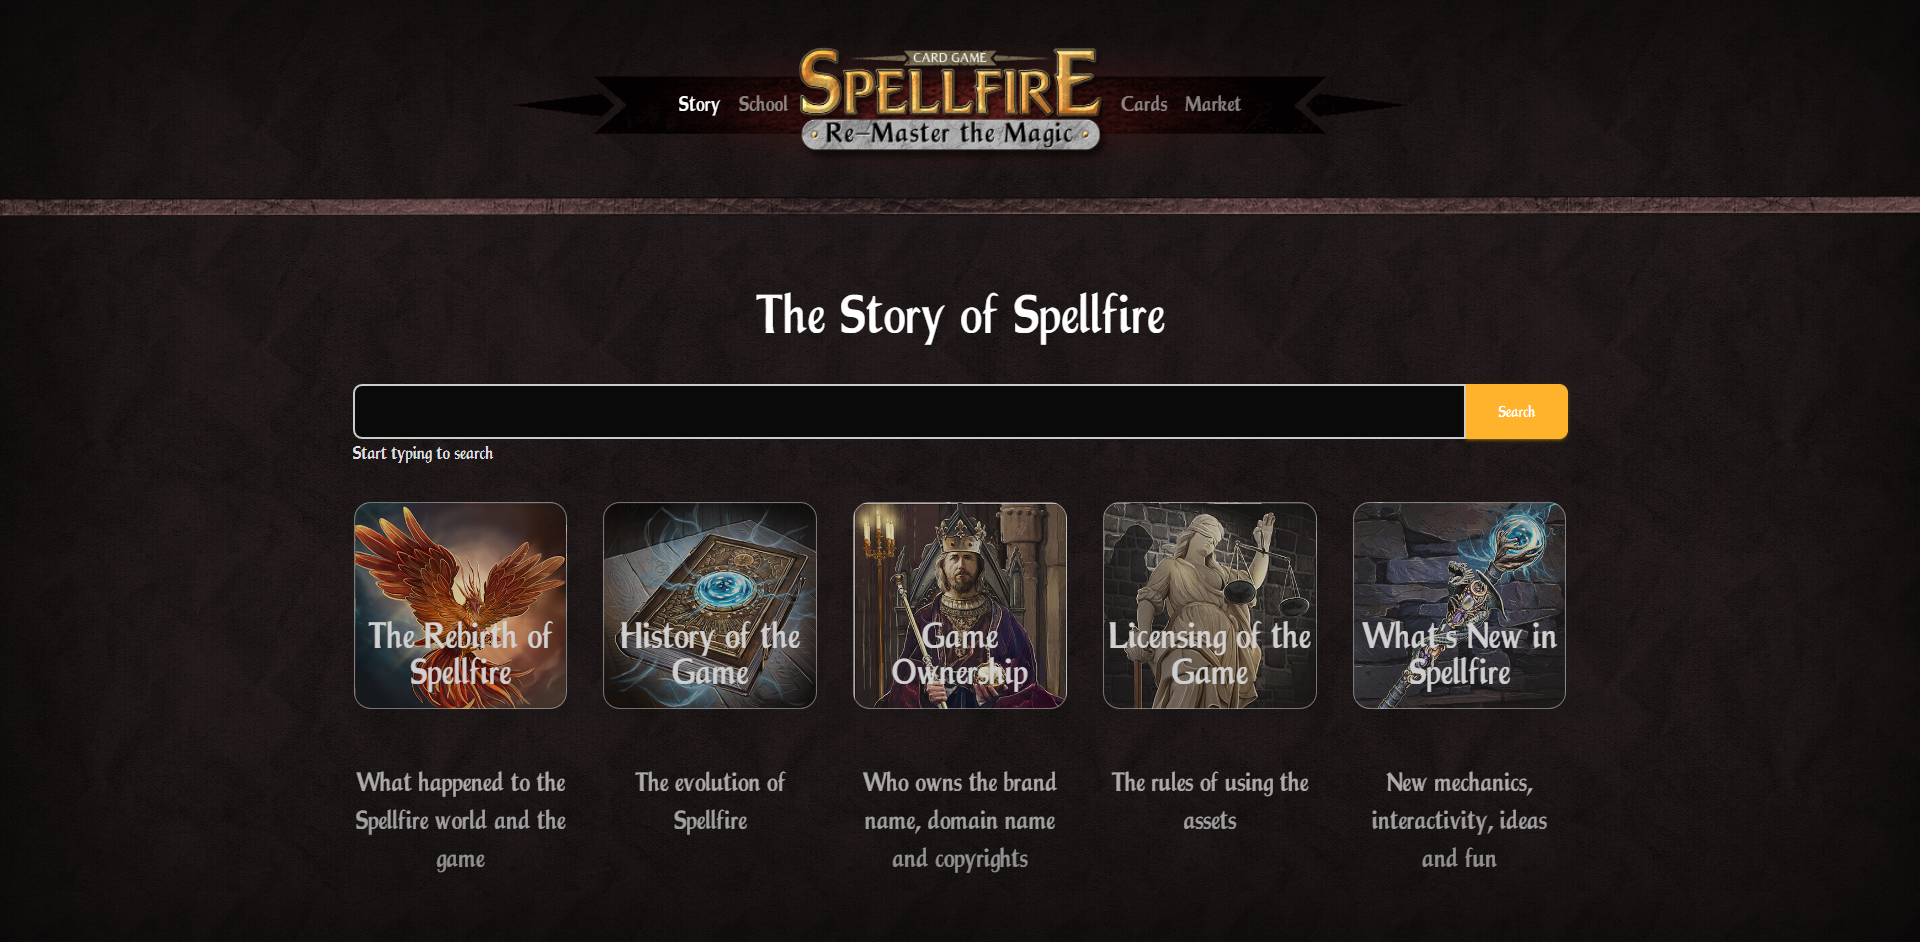 Spellfire releases cards as NFTs